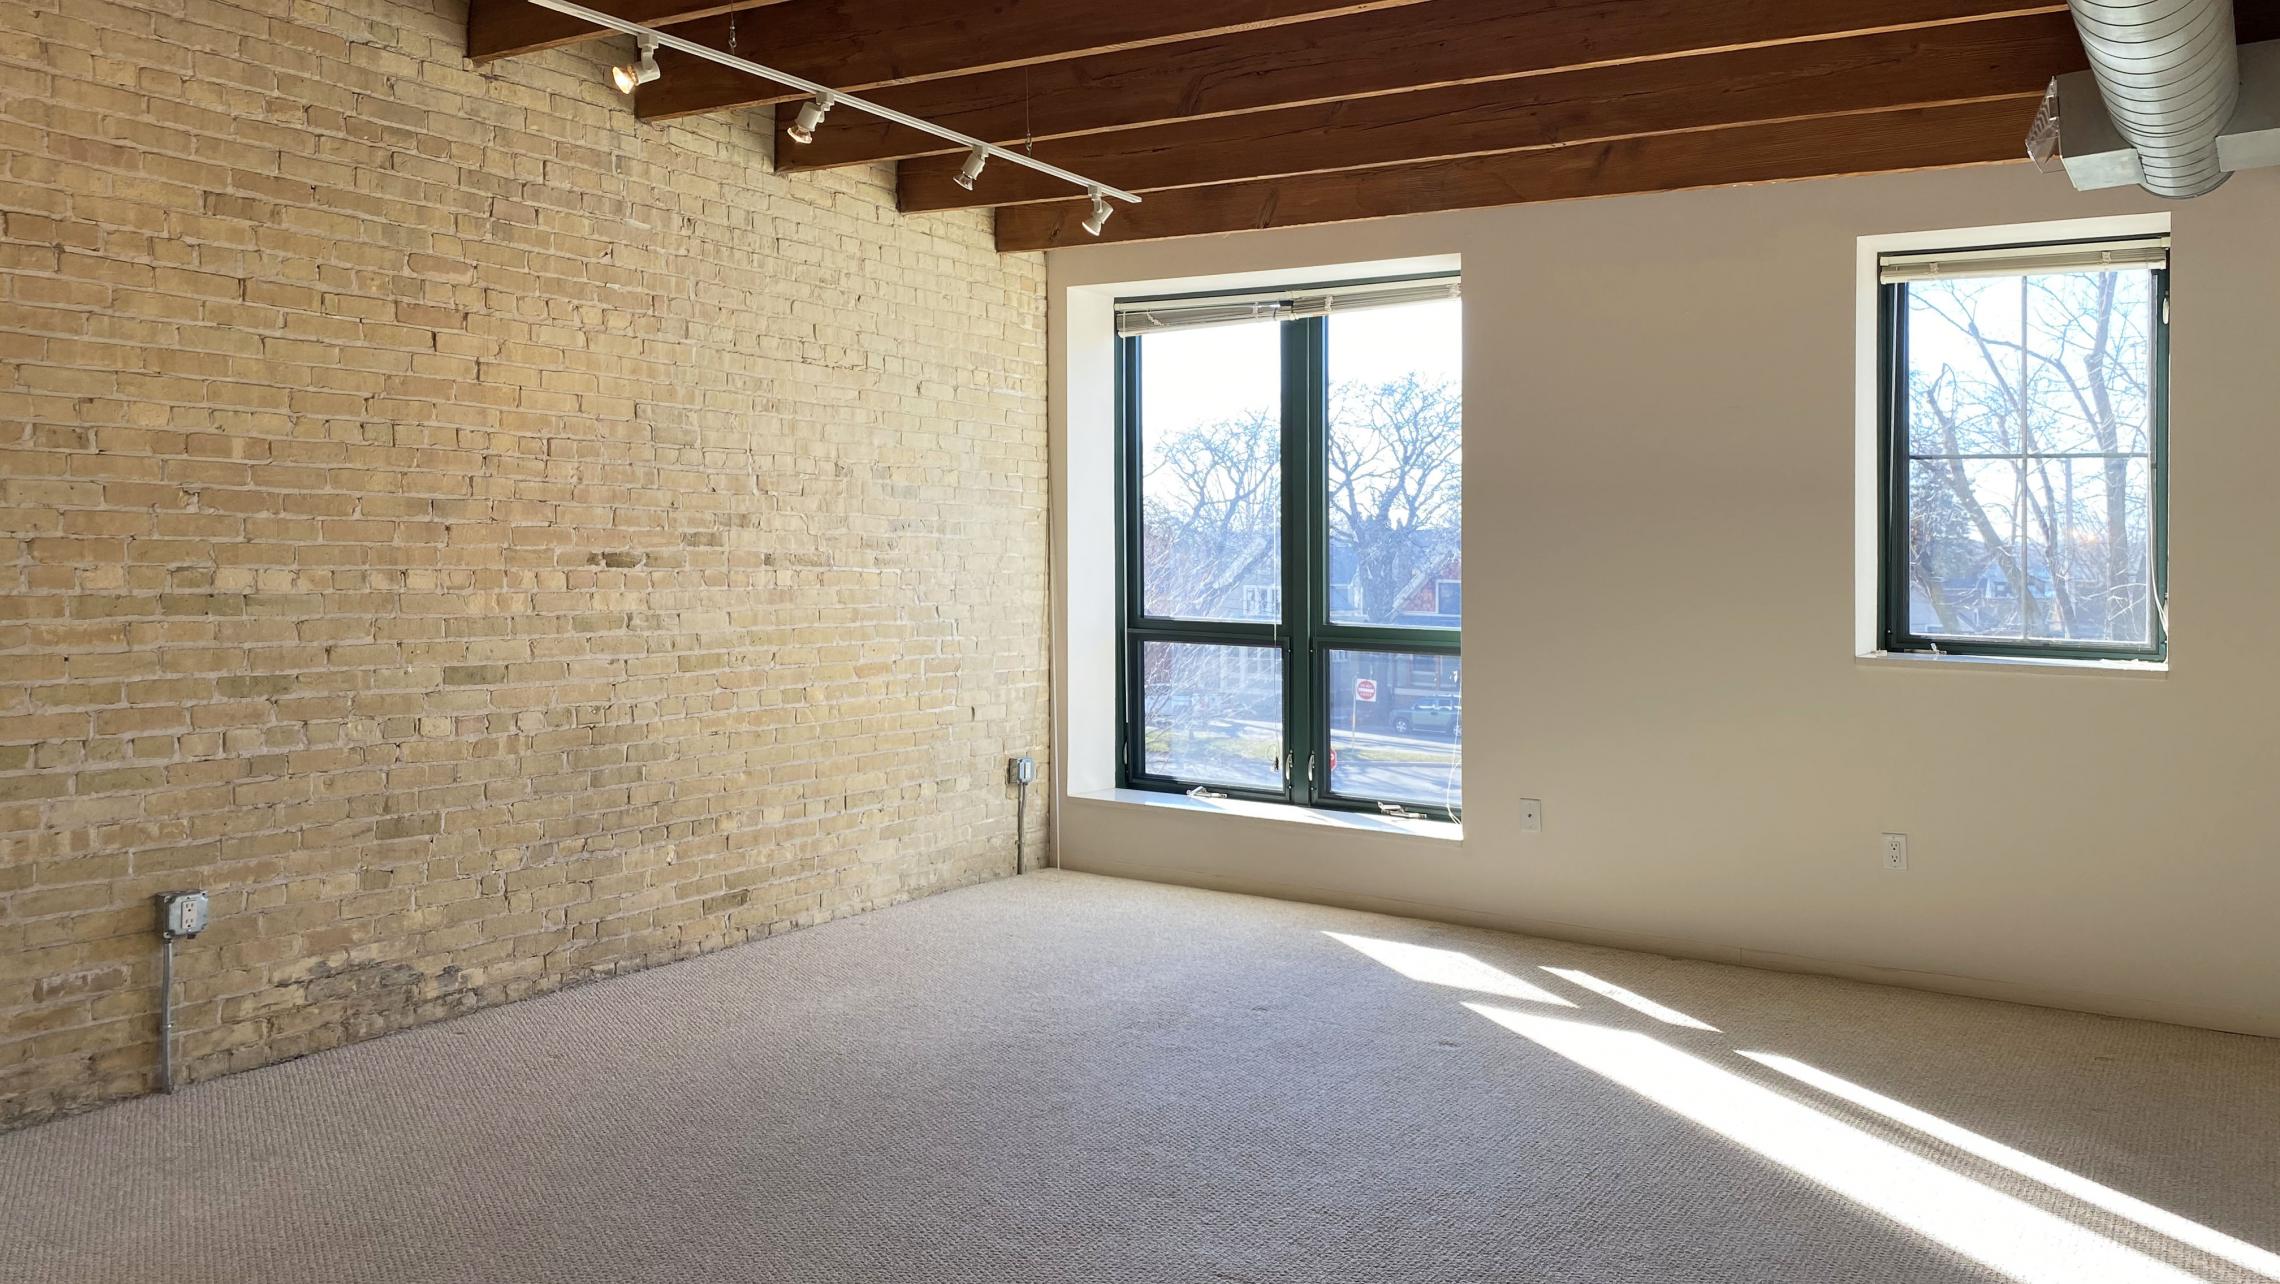 Tobacco-Lofts-at-The-Yards-Apartment-W206-Studio-Bathrom-Kitchen-Balcony-Historic-Exposed-Brick-Timber-Beams-Unique-Design-Cats-High-Ceiling-Balcony-Downtown-Madison-Fitness-Lounge-Courtyard-Top-Floor-Vaulted-Ceiling